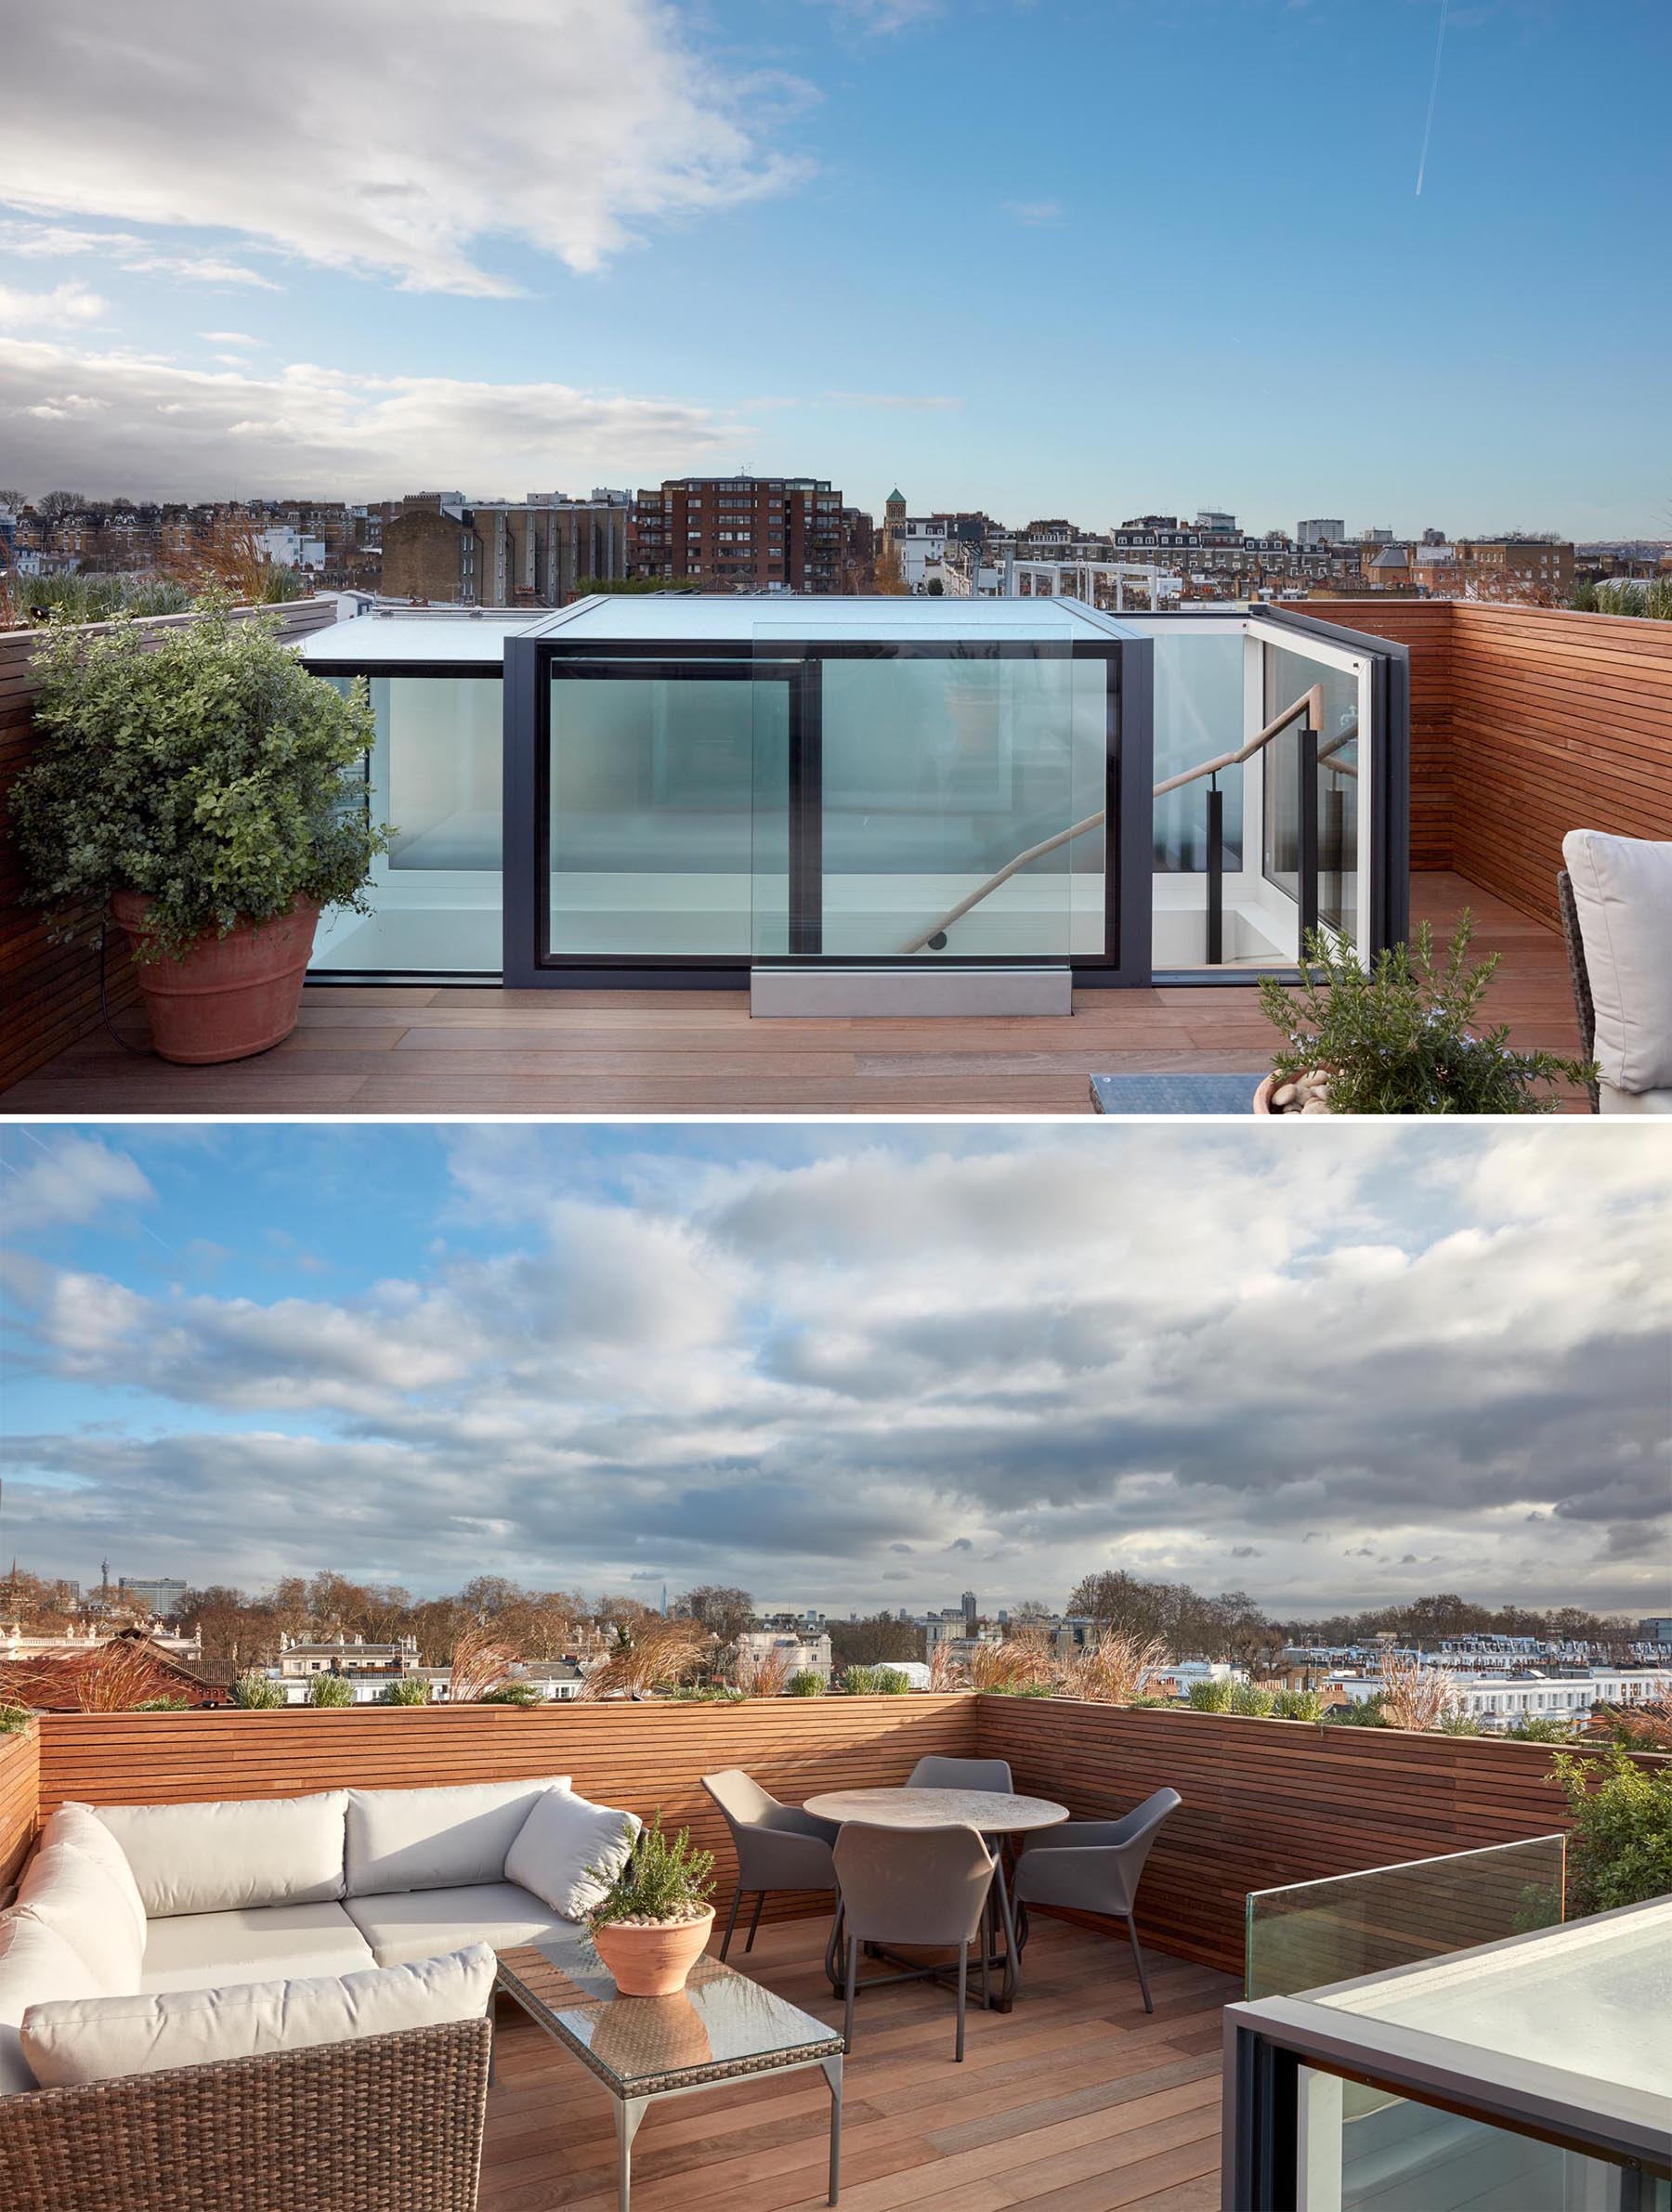 A modern wood-lined rooftop deck with a lounge and dining area.